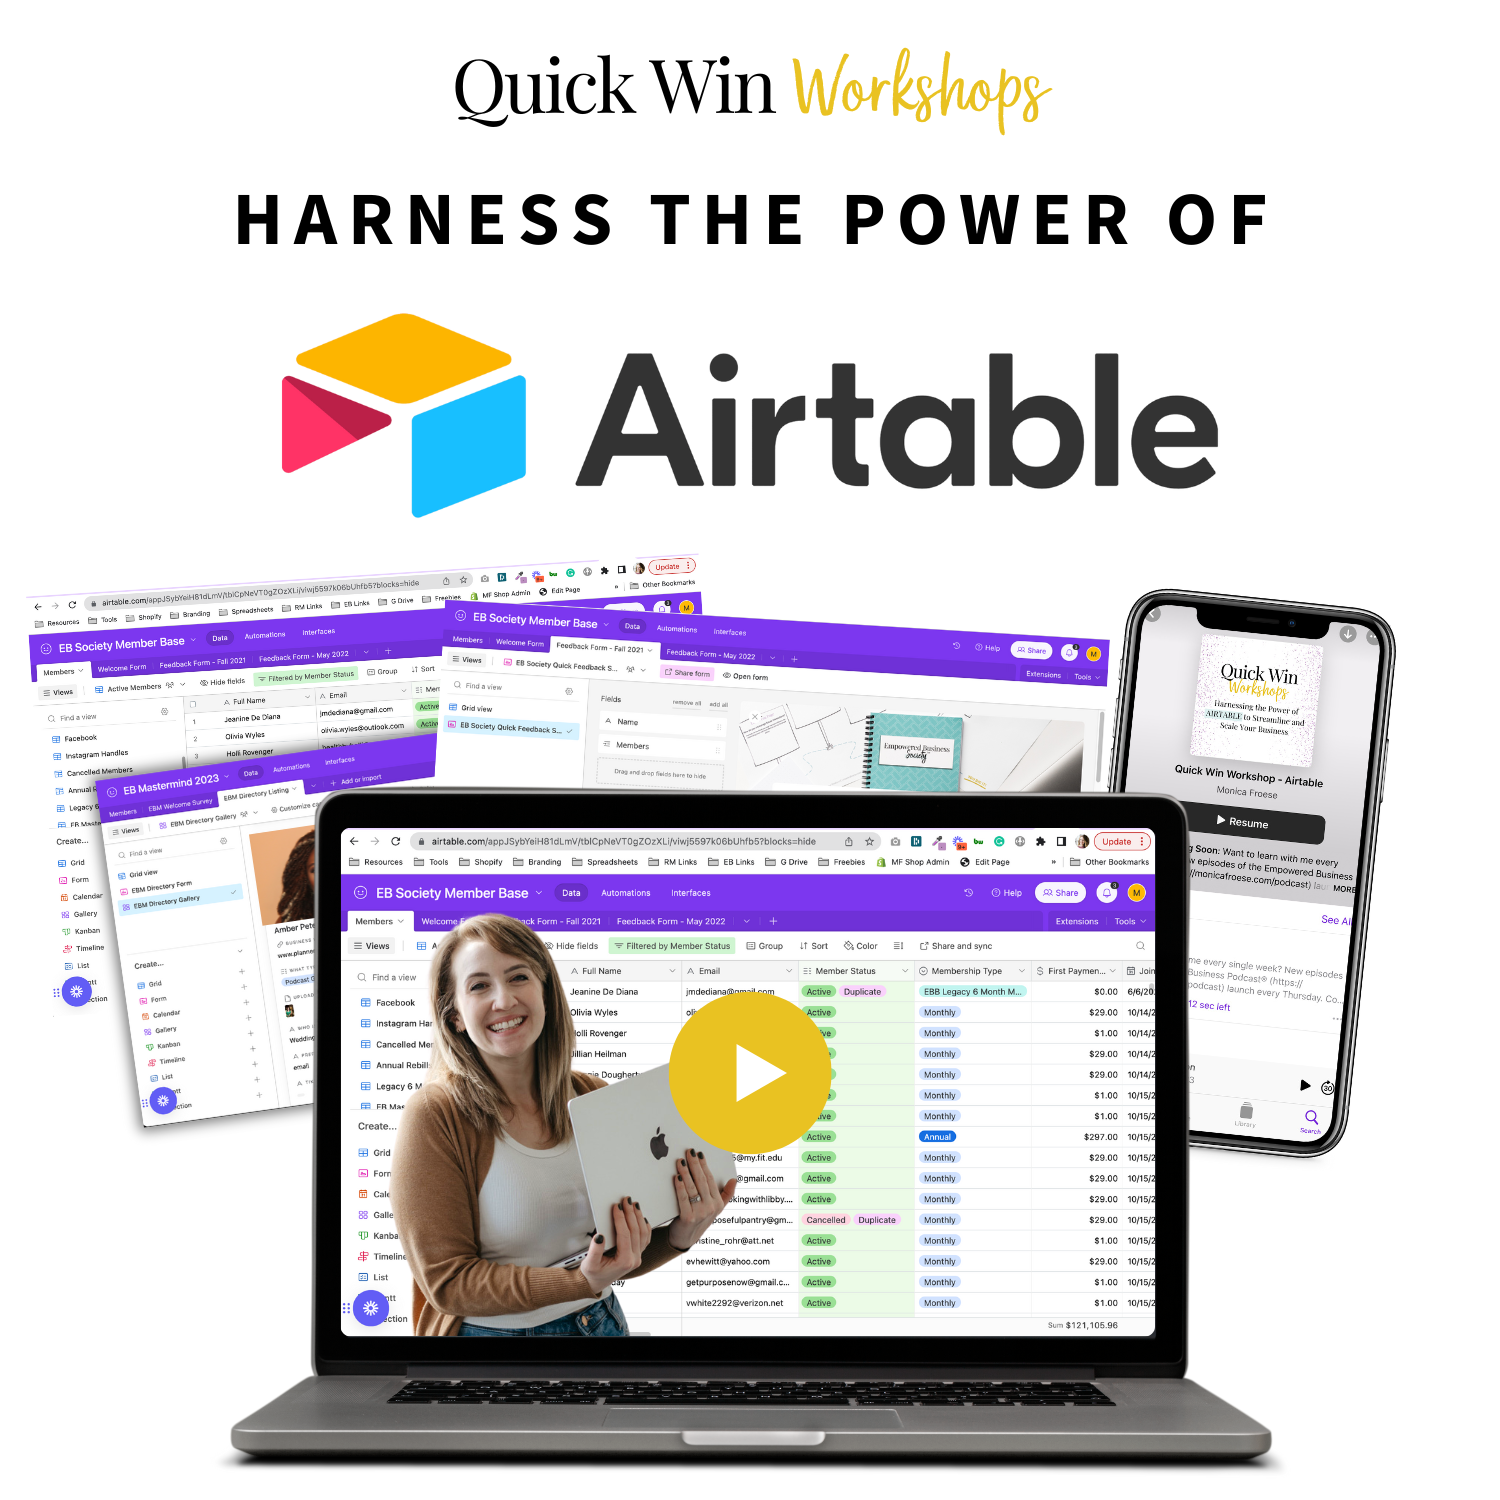 Learn how to harness the power of airtable in this action-packed 90-minute workshop!